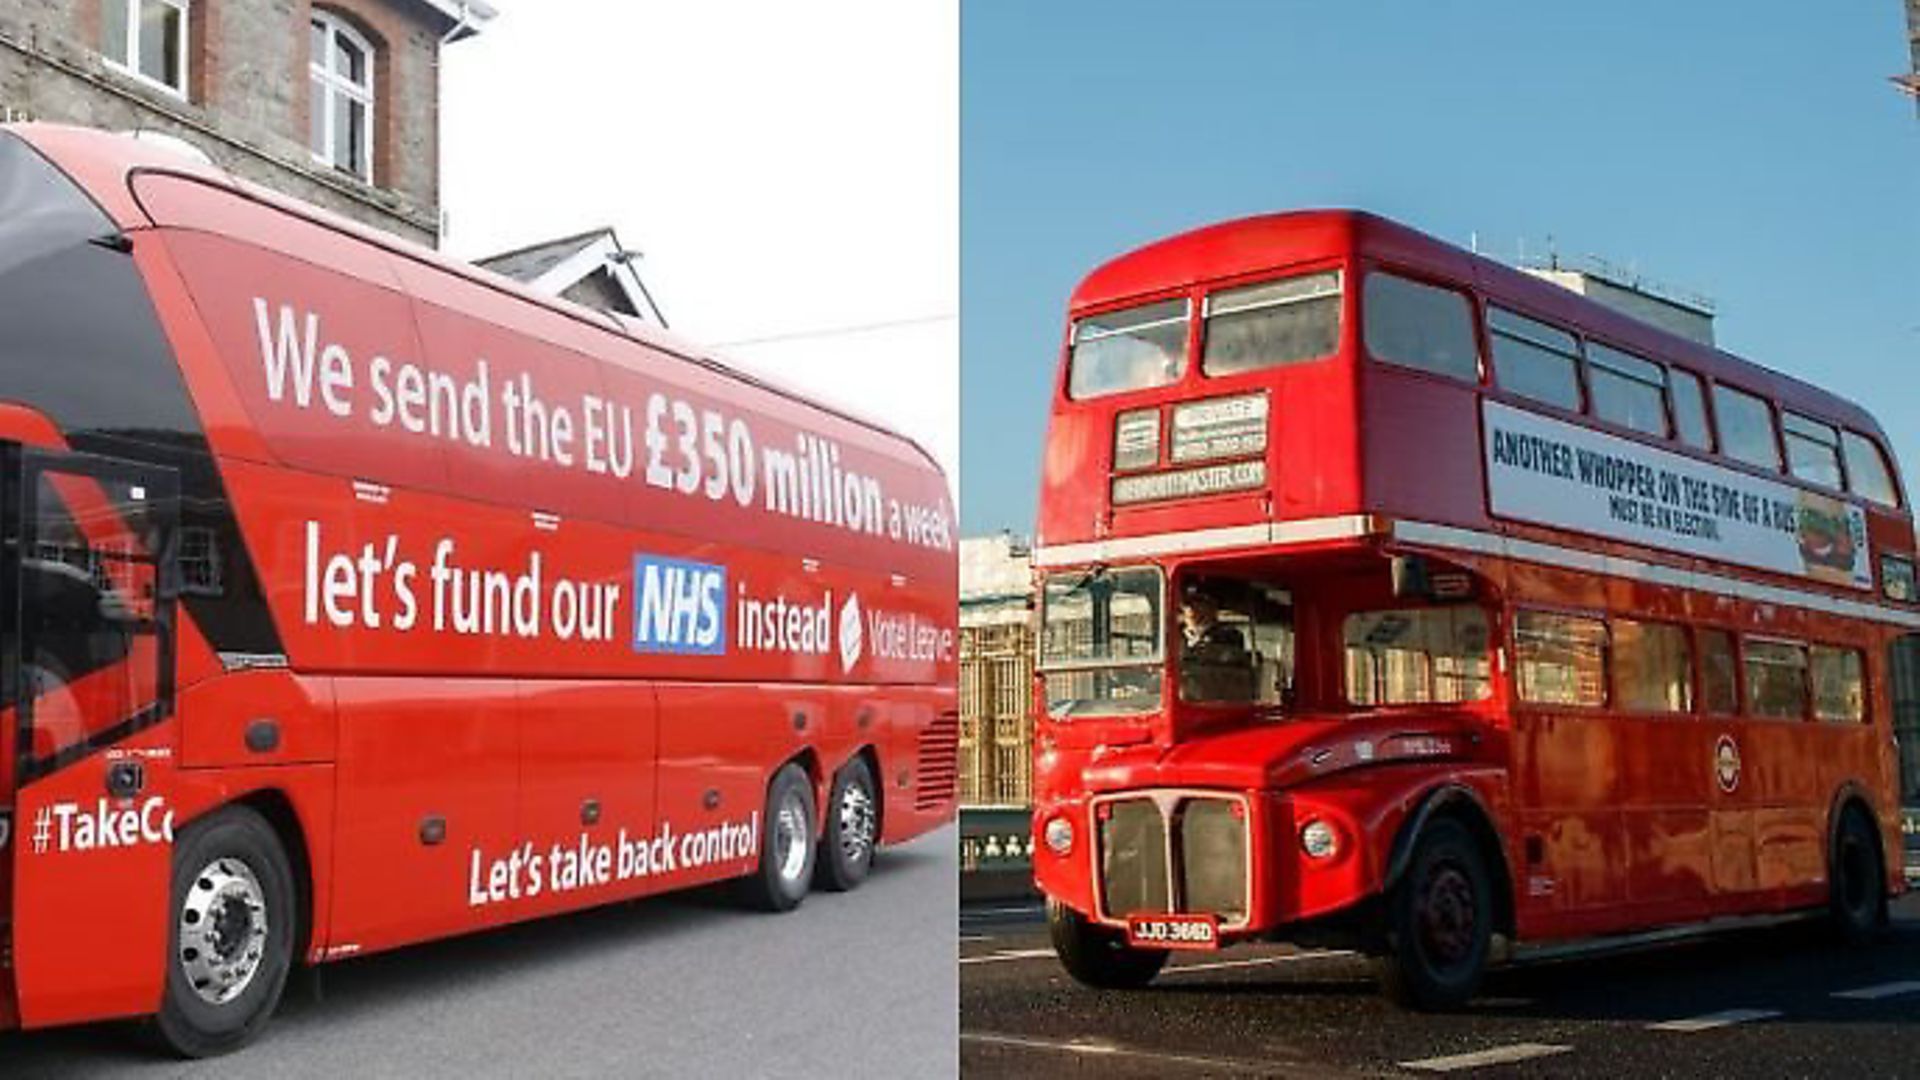 Burger King mocks the Vote Leave campaign bus. Photograph: TNE/Contributed. - Credit: Archant